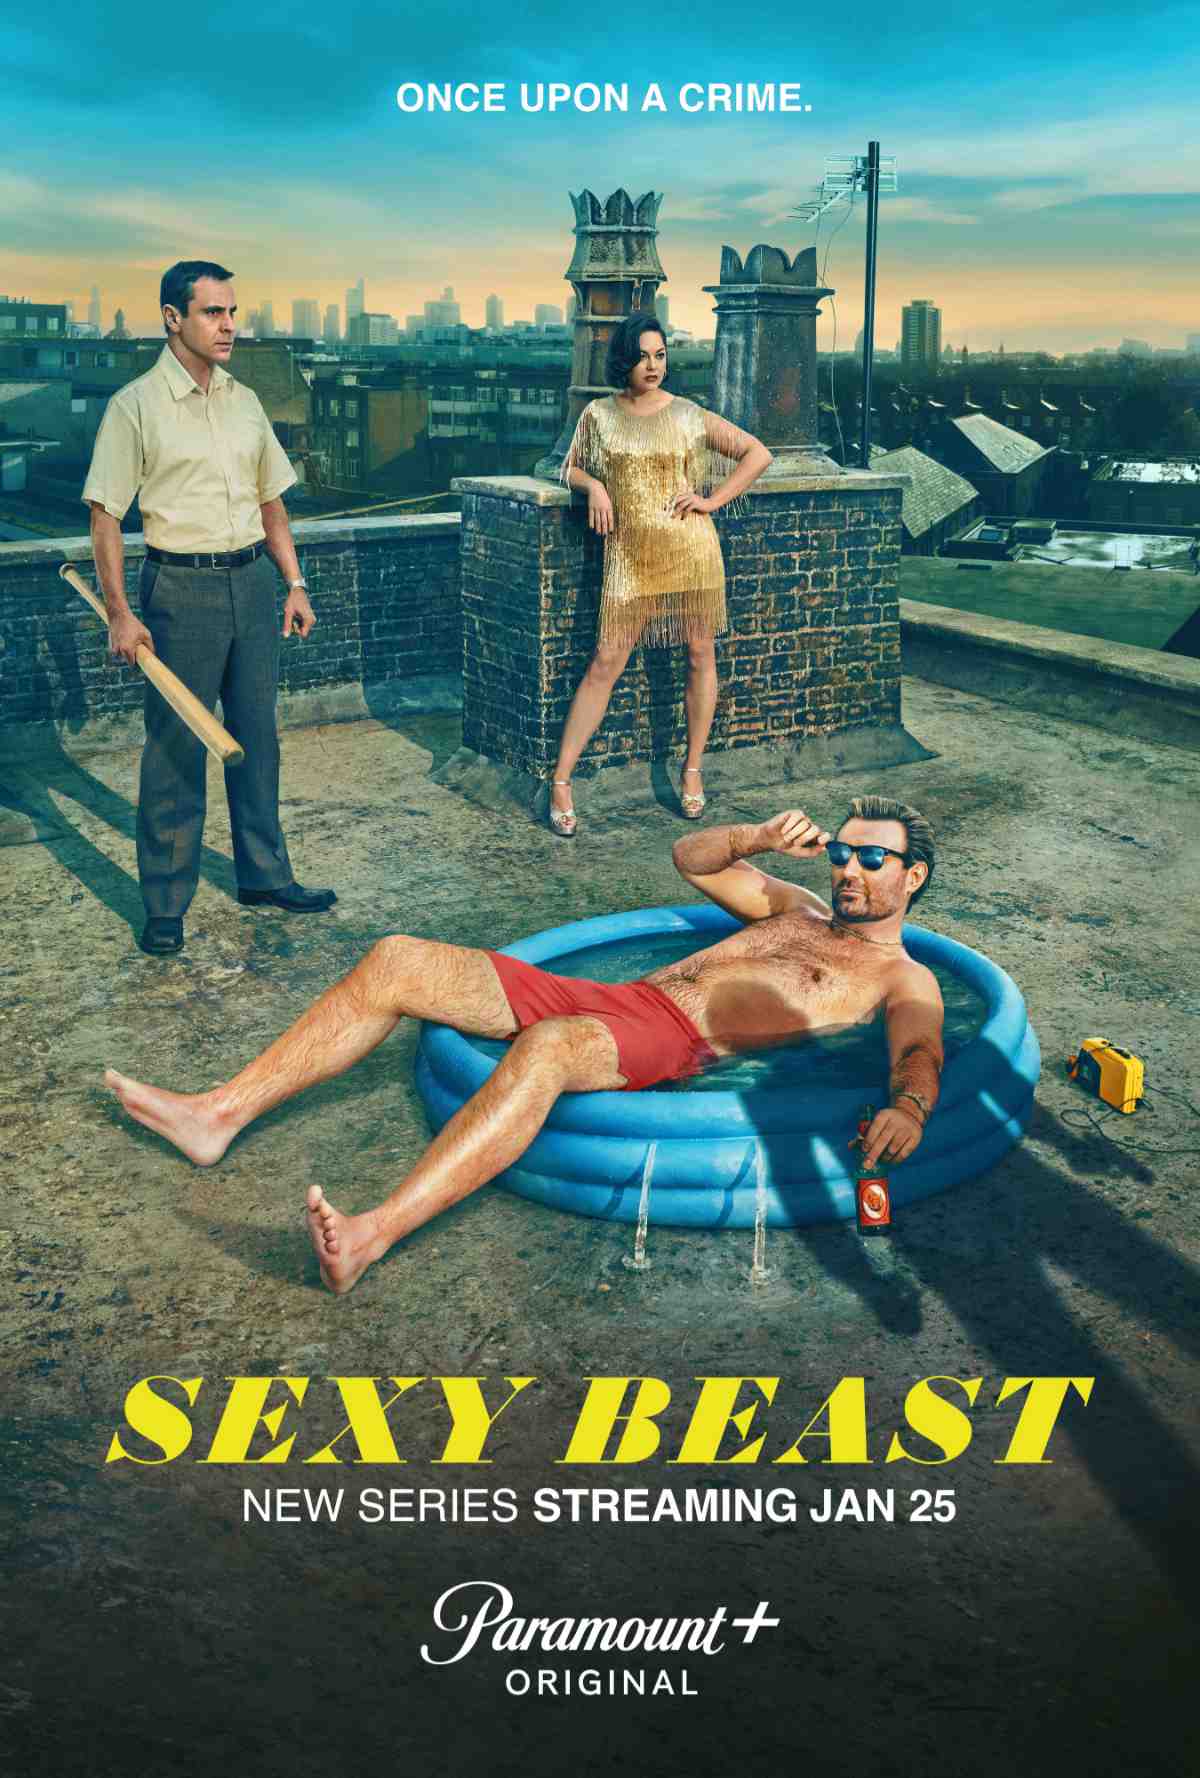 (L-R) Emun Elliott as Don, Sarah Greene as Deedee and James McArdle as Gal Dove in the Key Art for Sexy Beast.